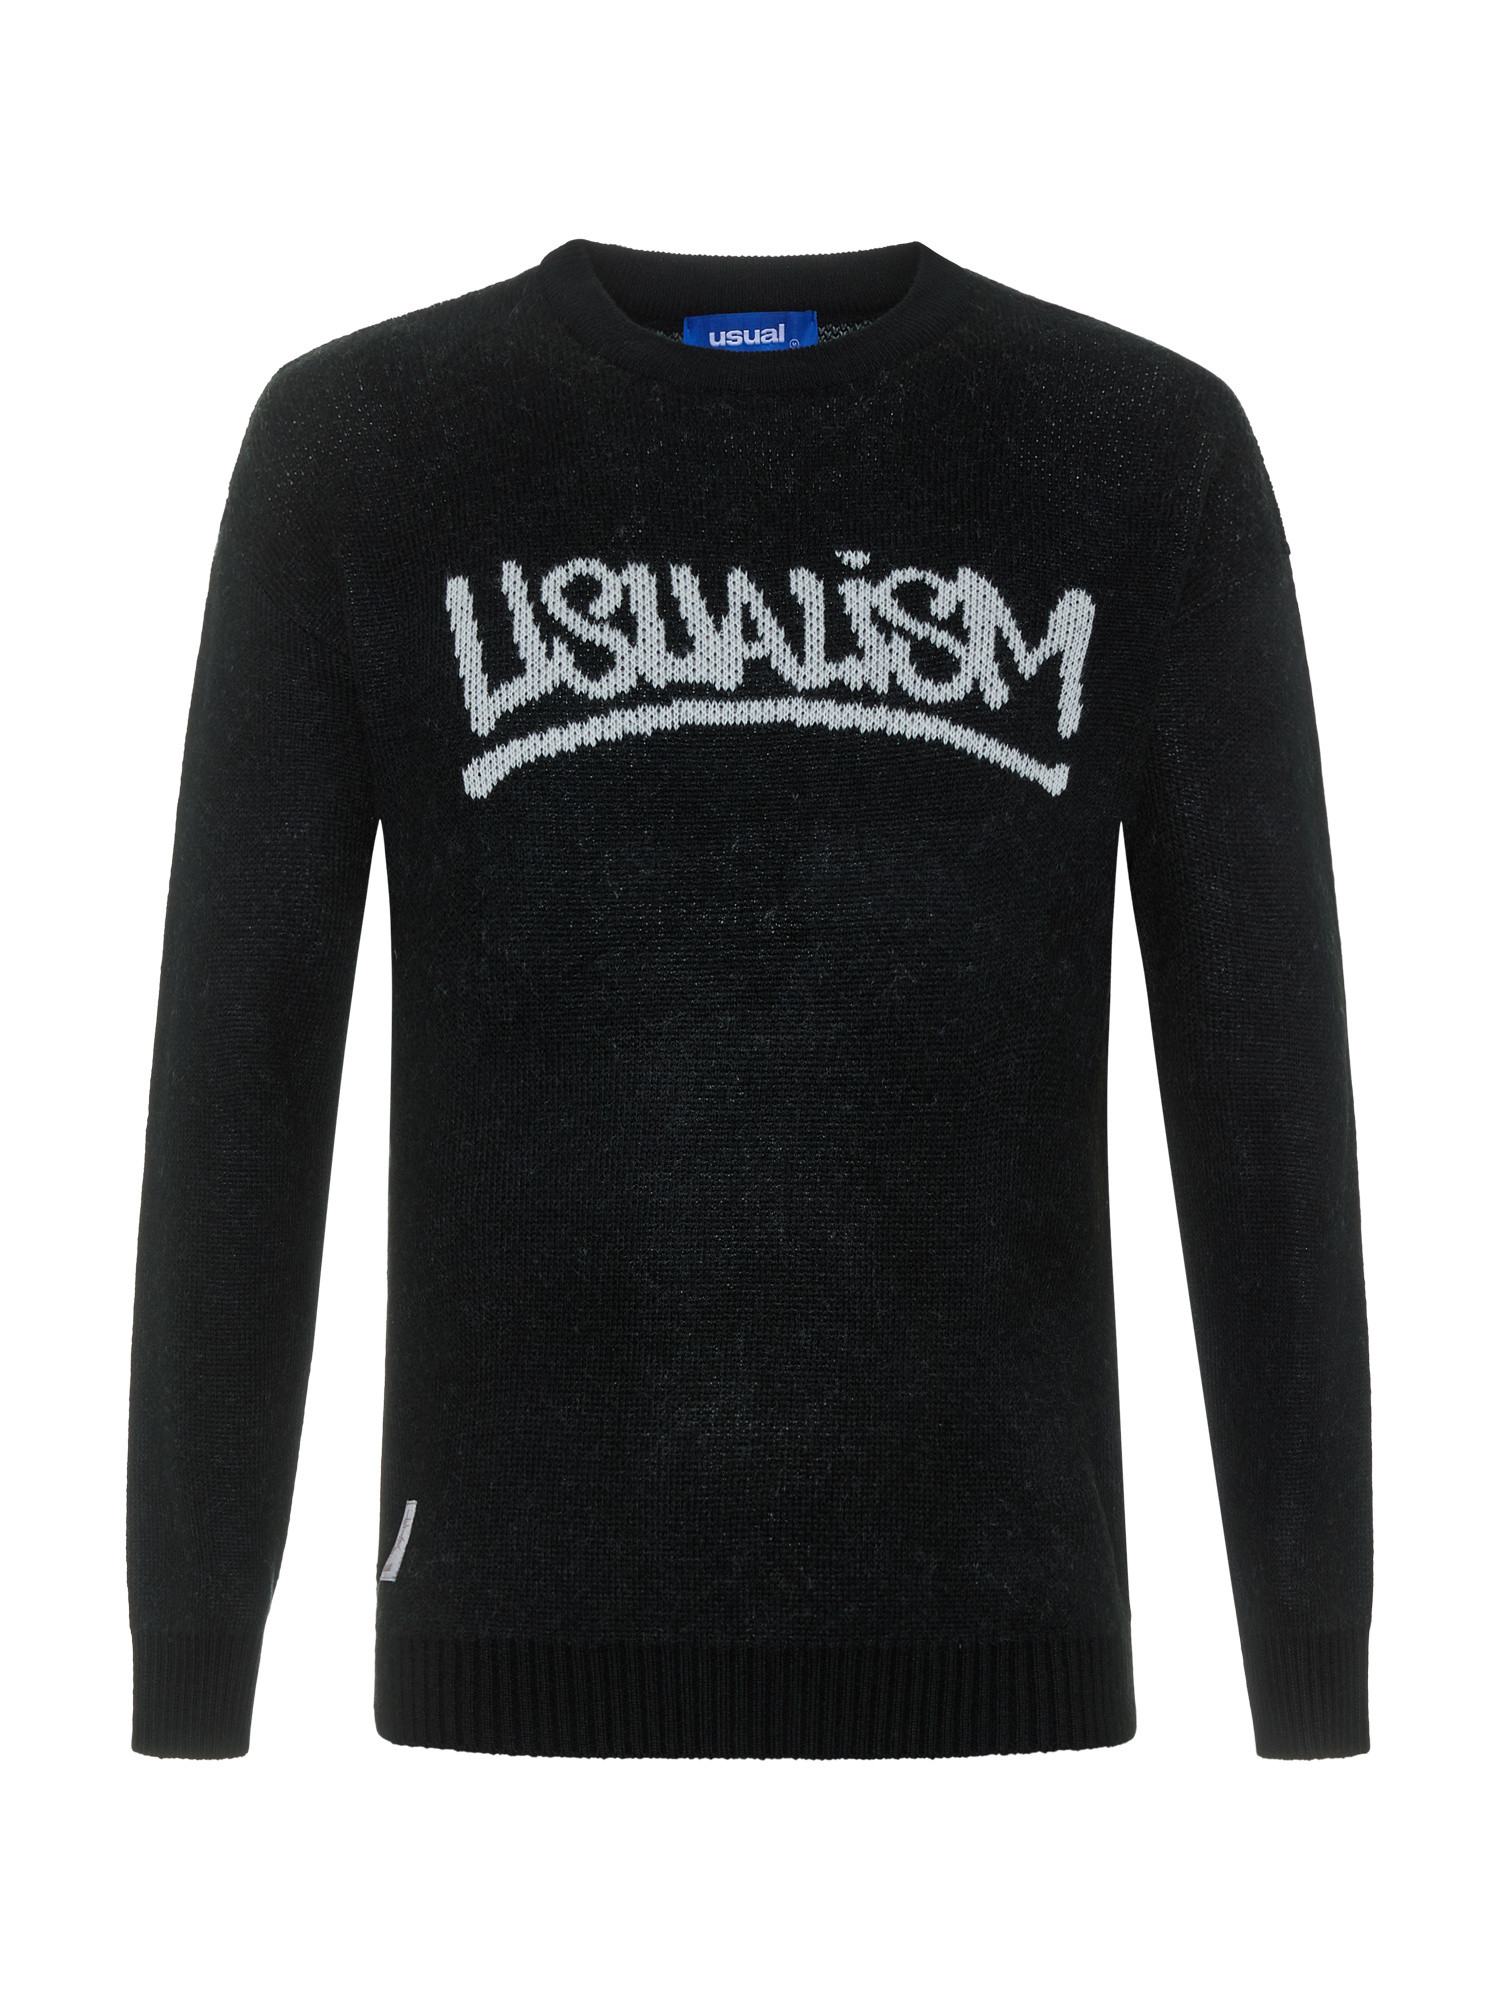 Usual - Maglione Girocollo Usualism, Nero, large image number 0